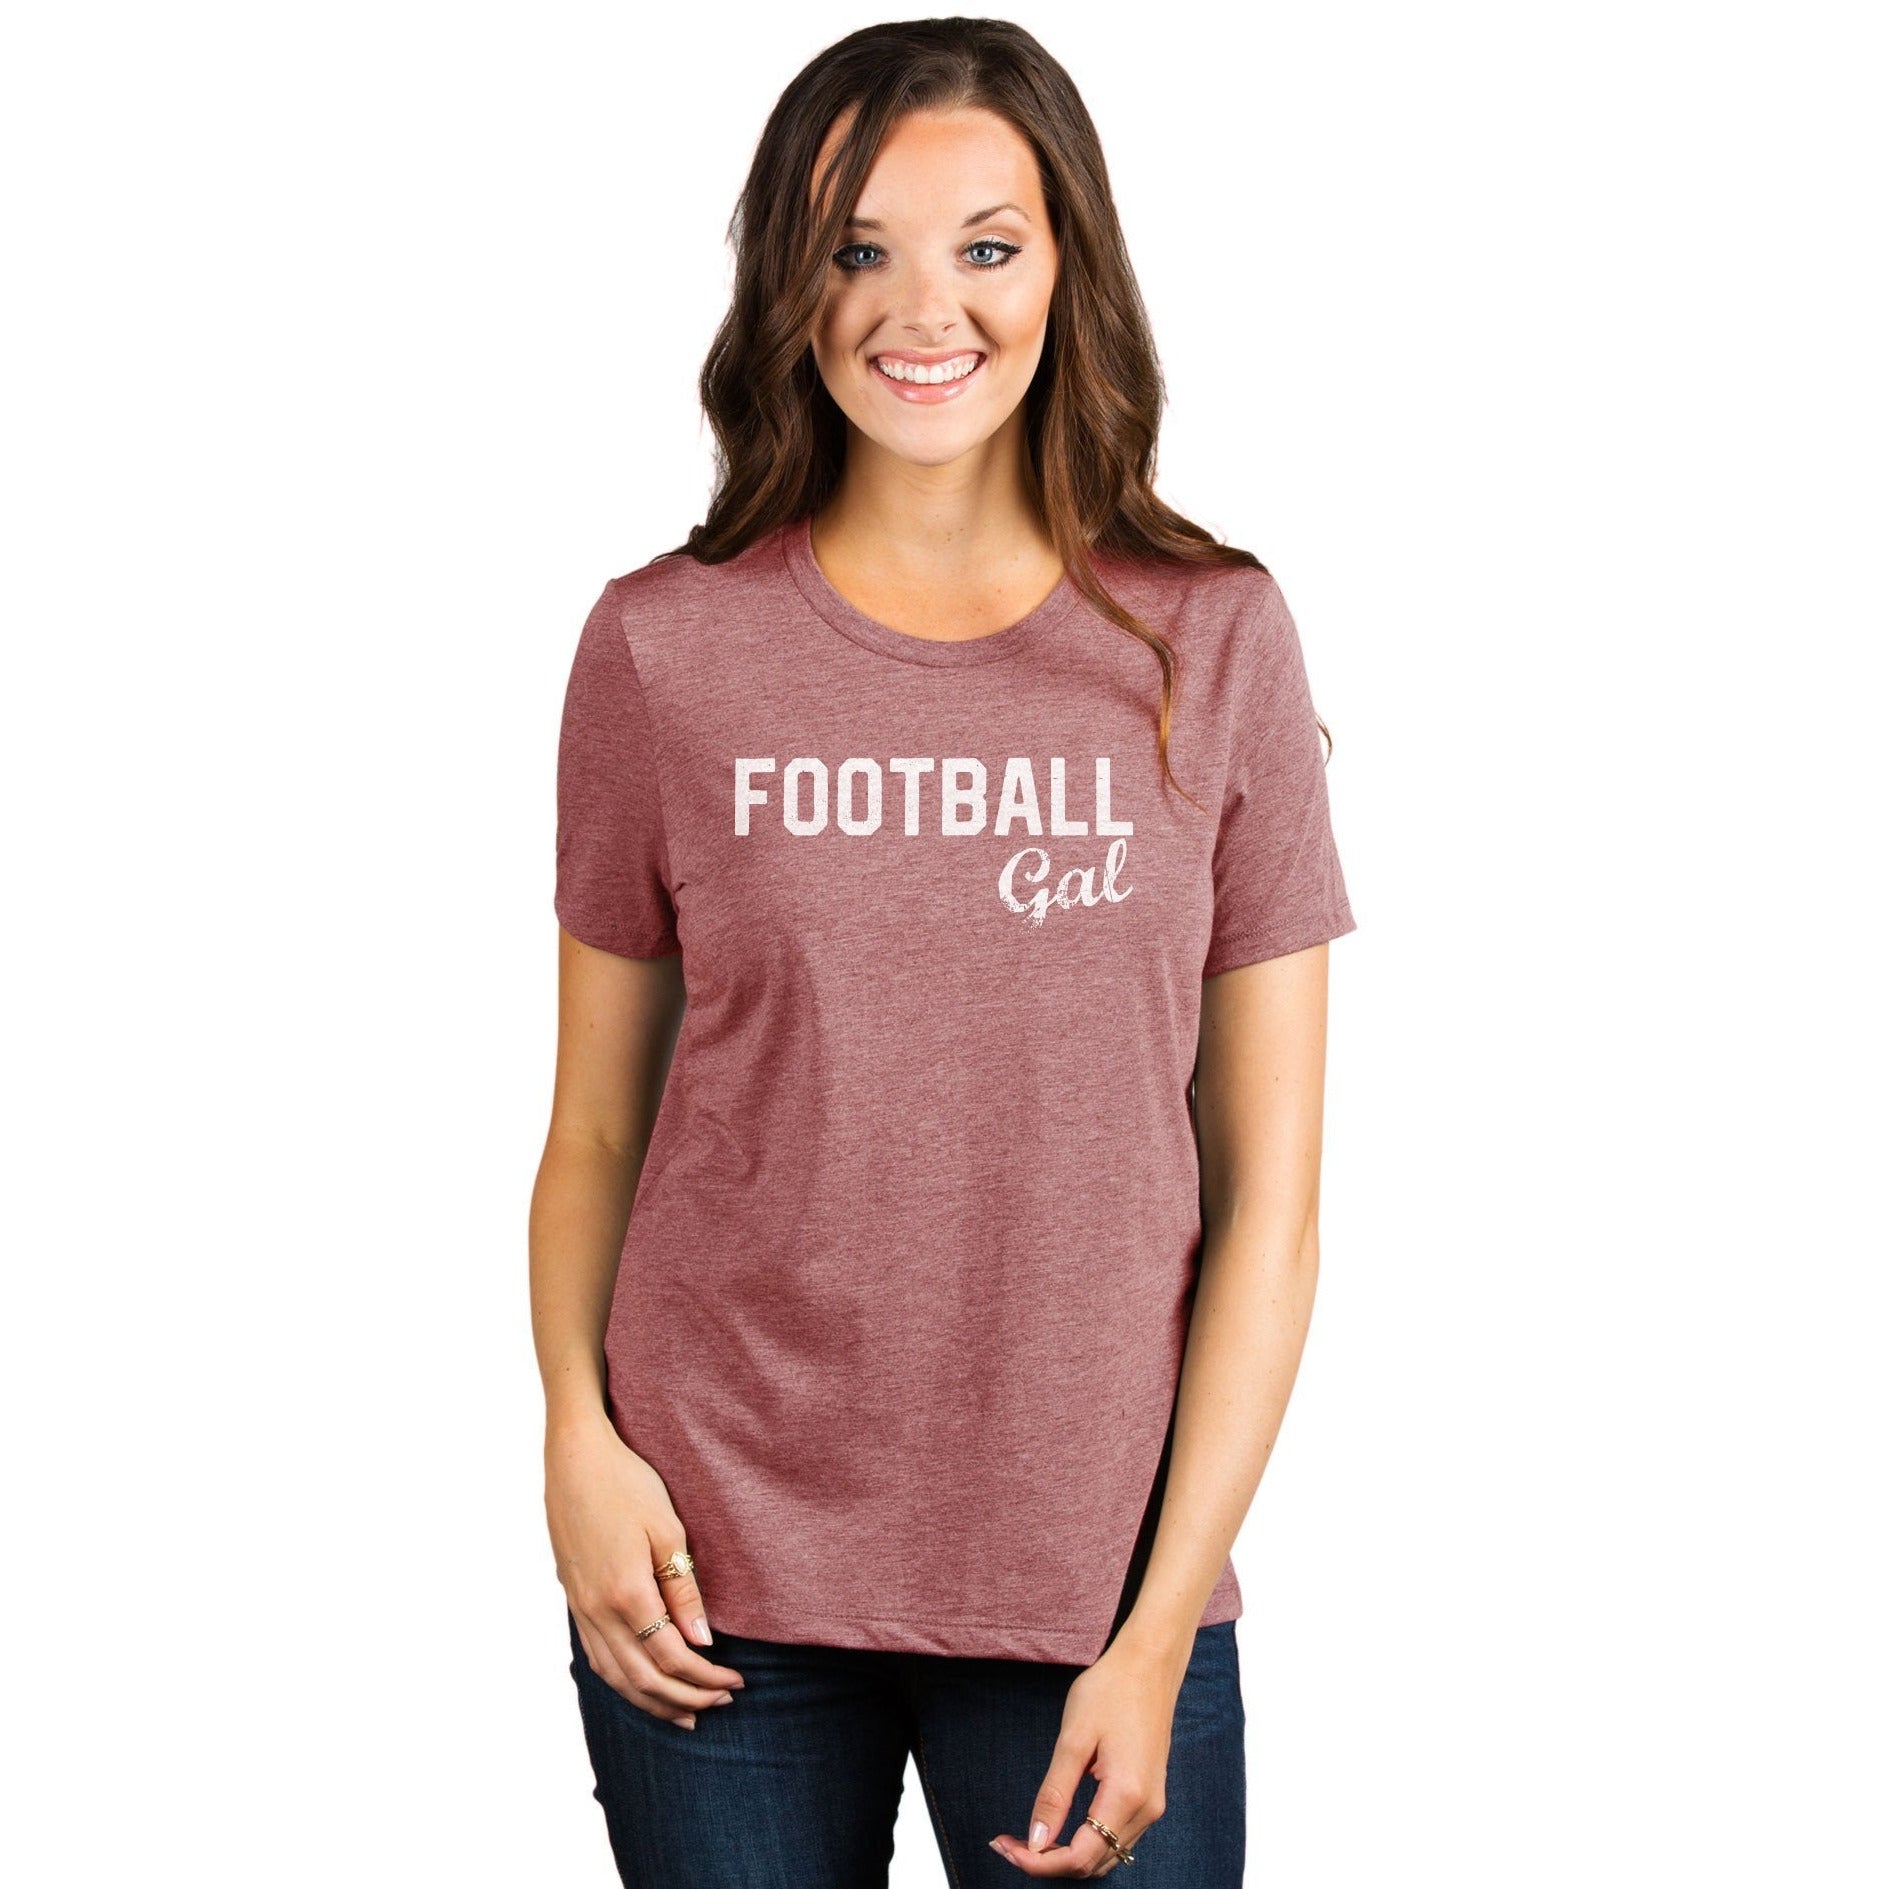 Football Gal Women's Relaxed Crewneck T-Shirt Top Tee Heather Rouge Model
